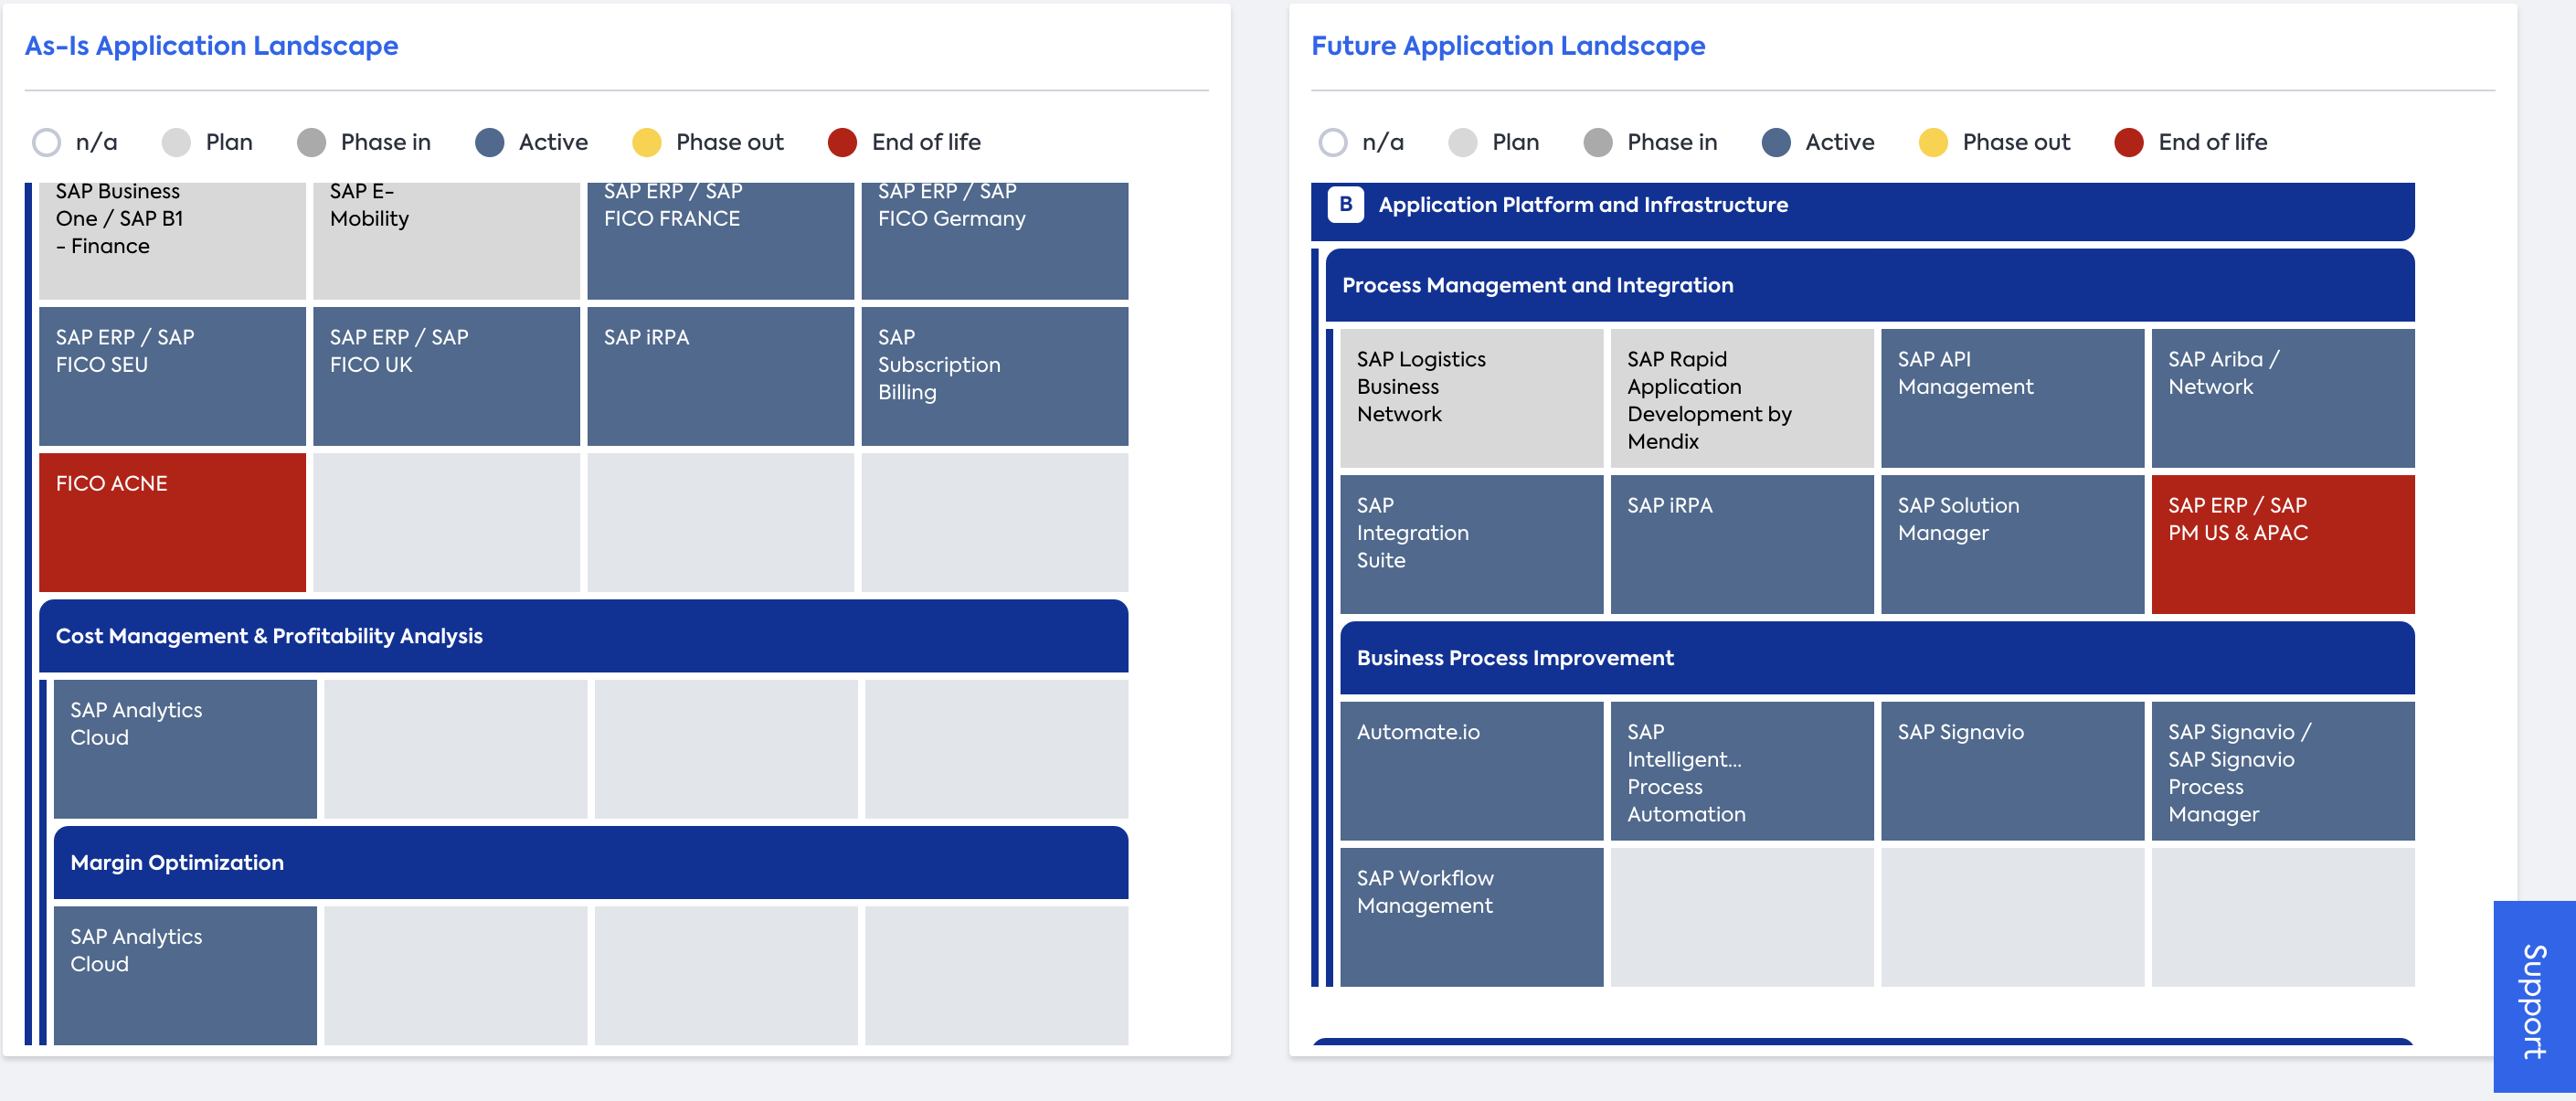 Application Landscape Reports showing the contrast between as-is and the future-state landscape.